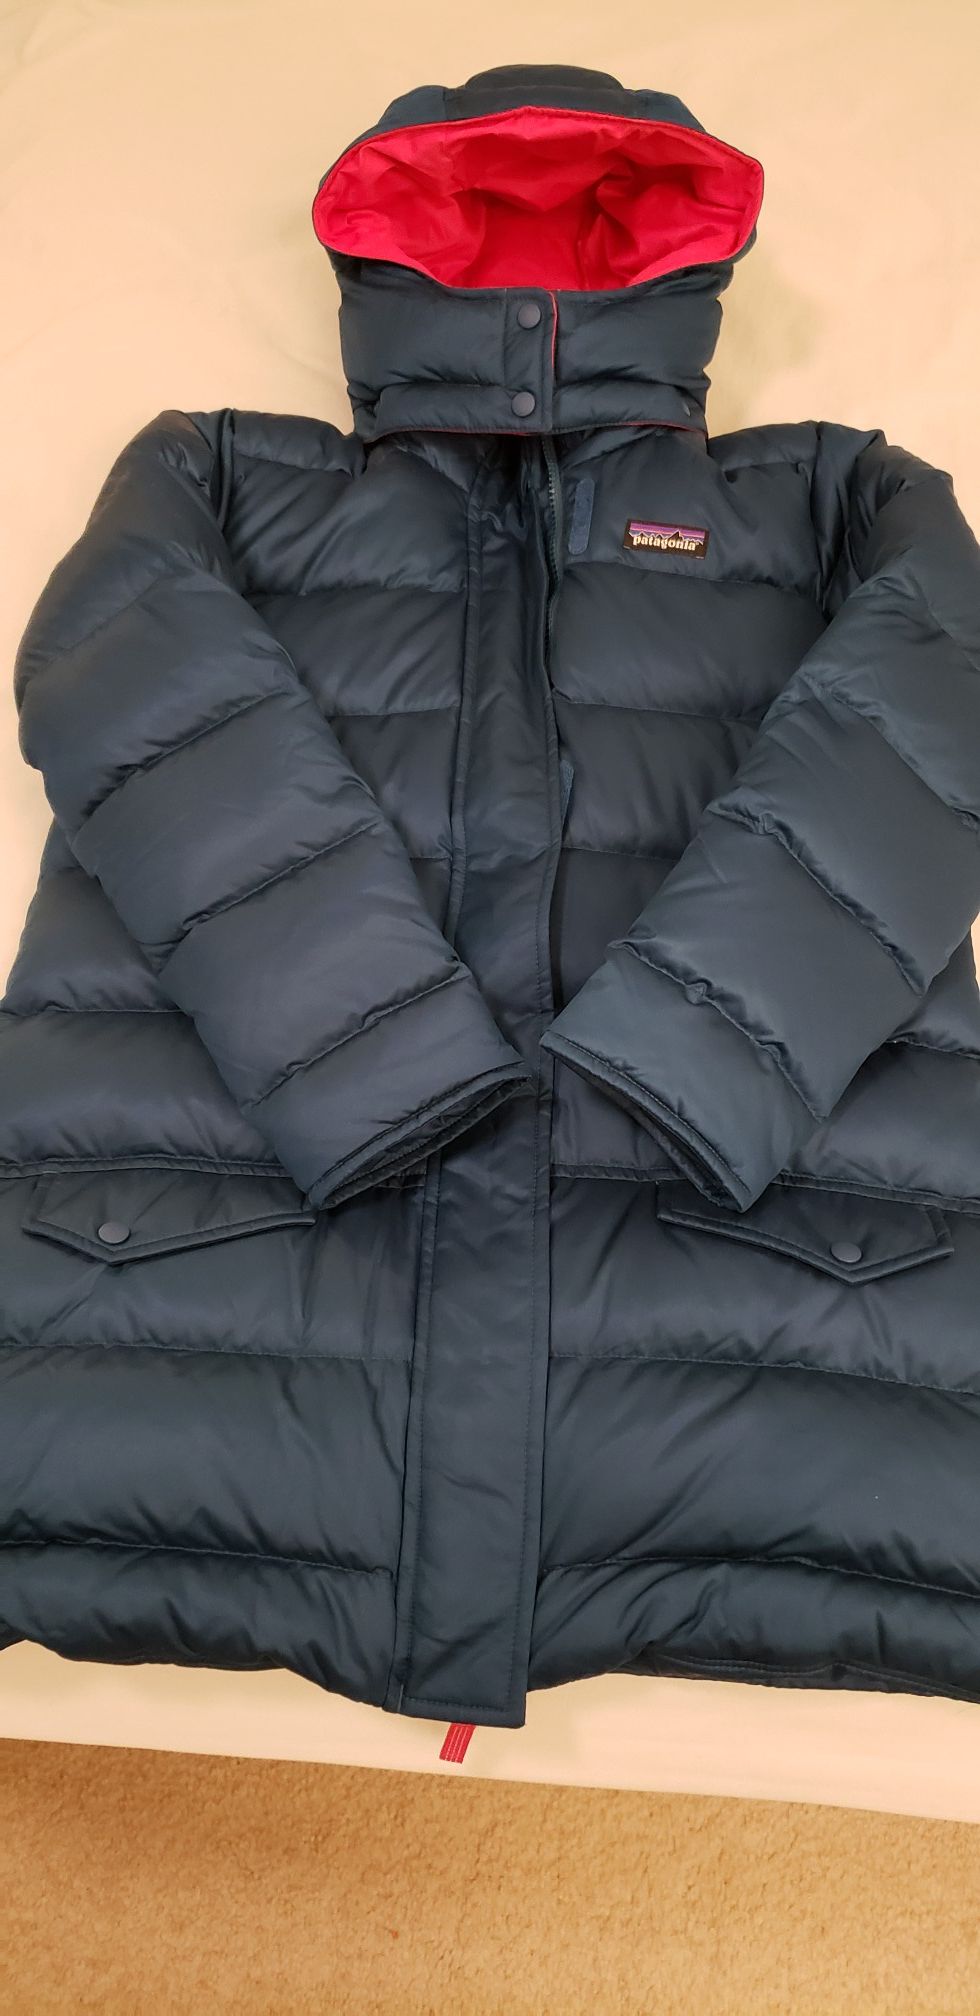 New Patagonia parka size youth M (10)